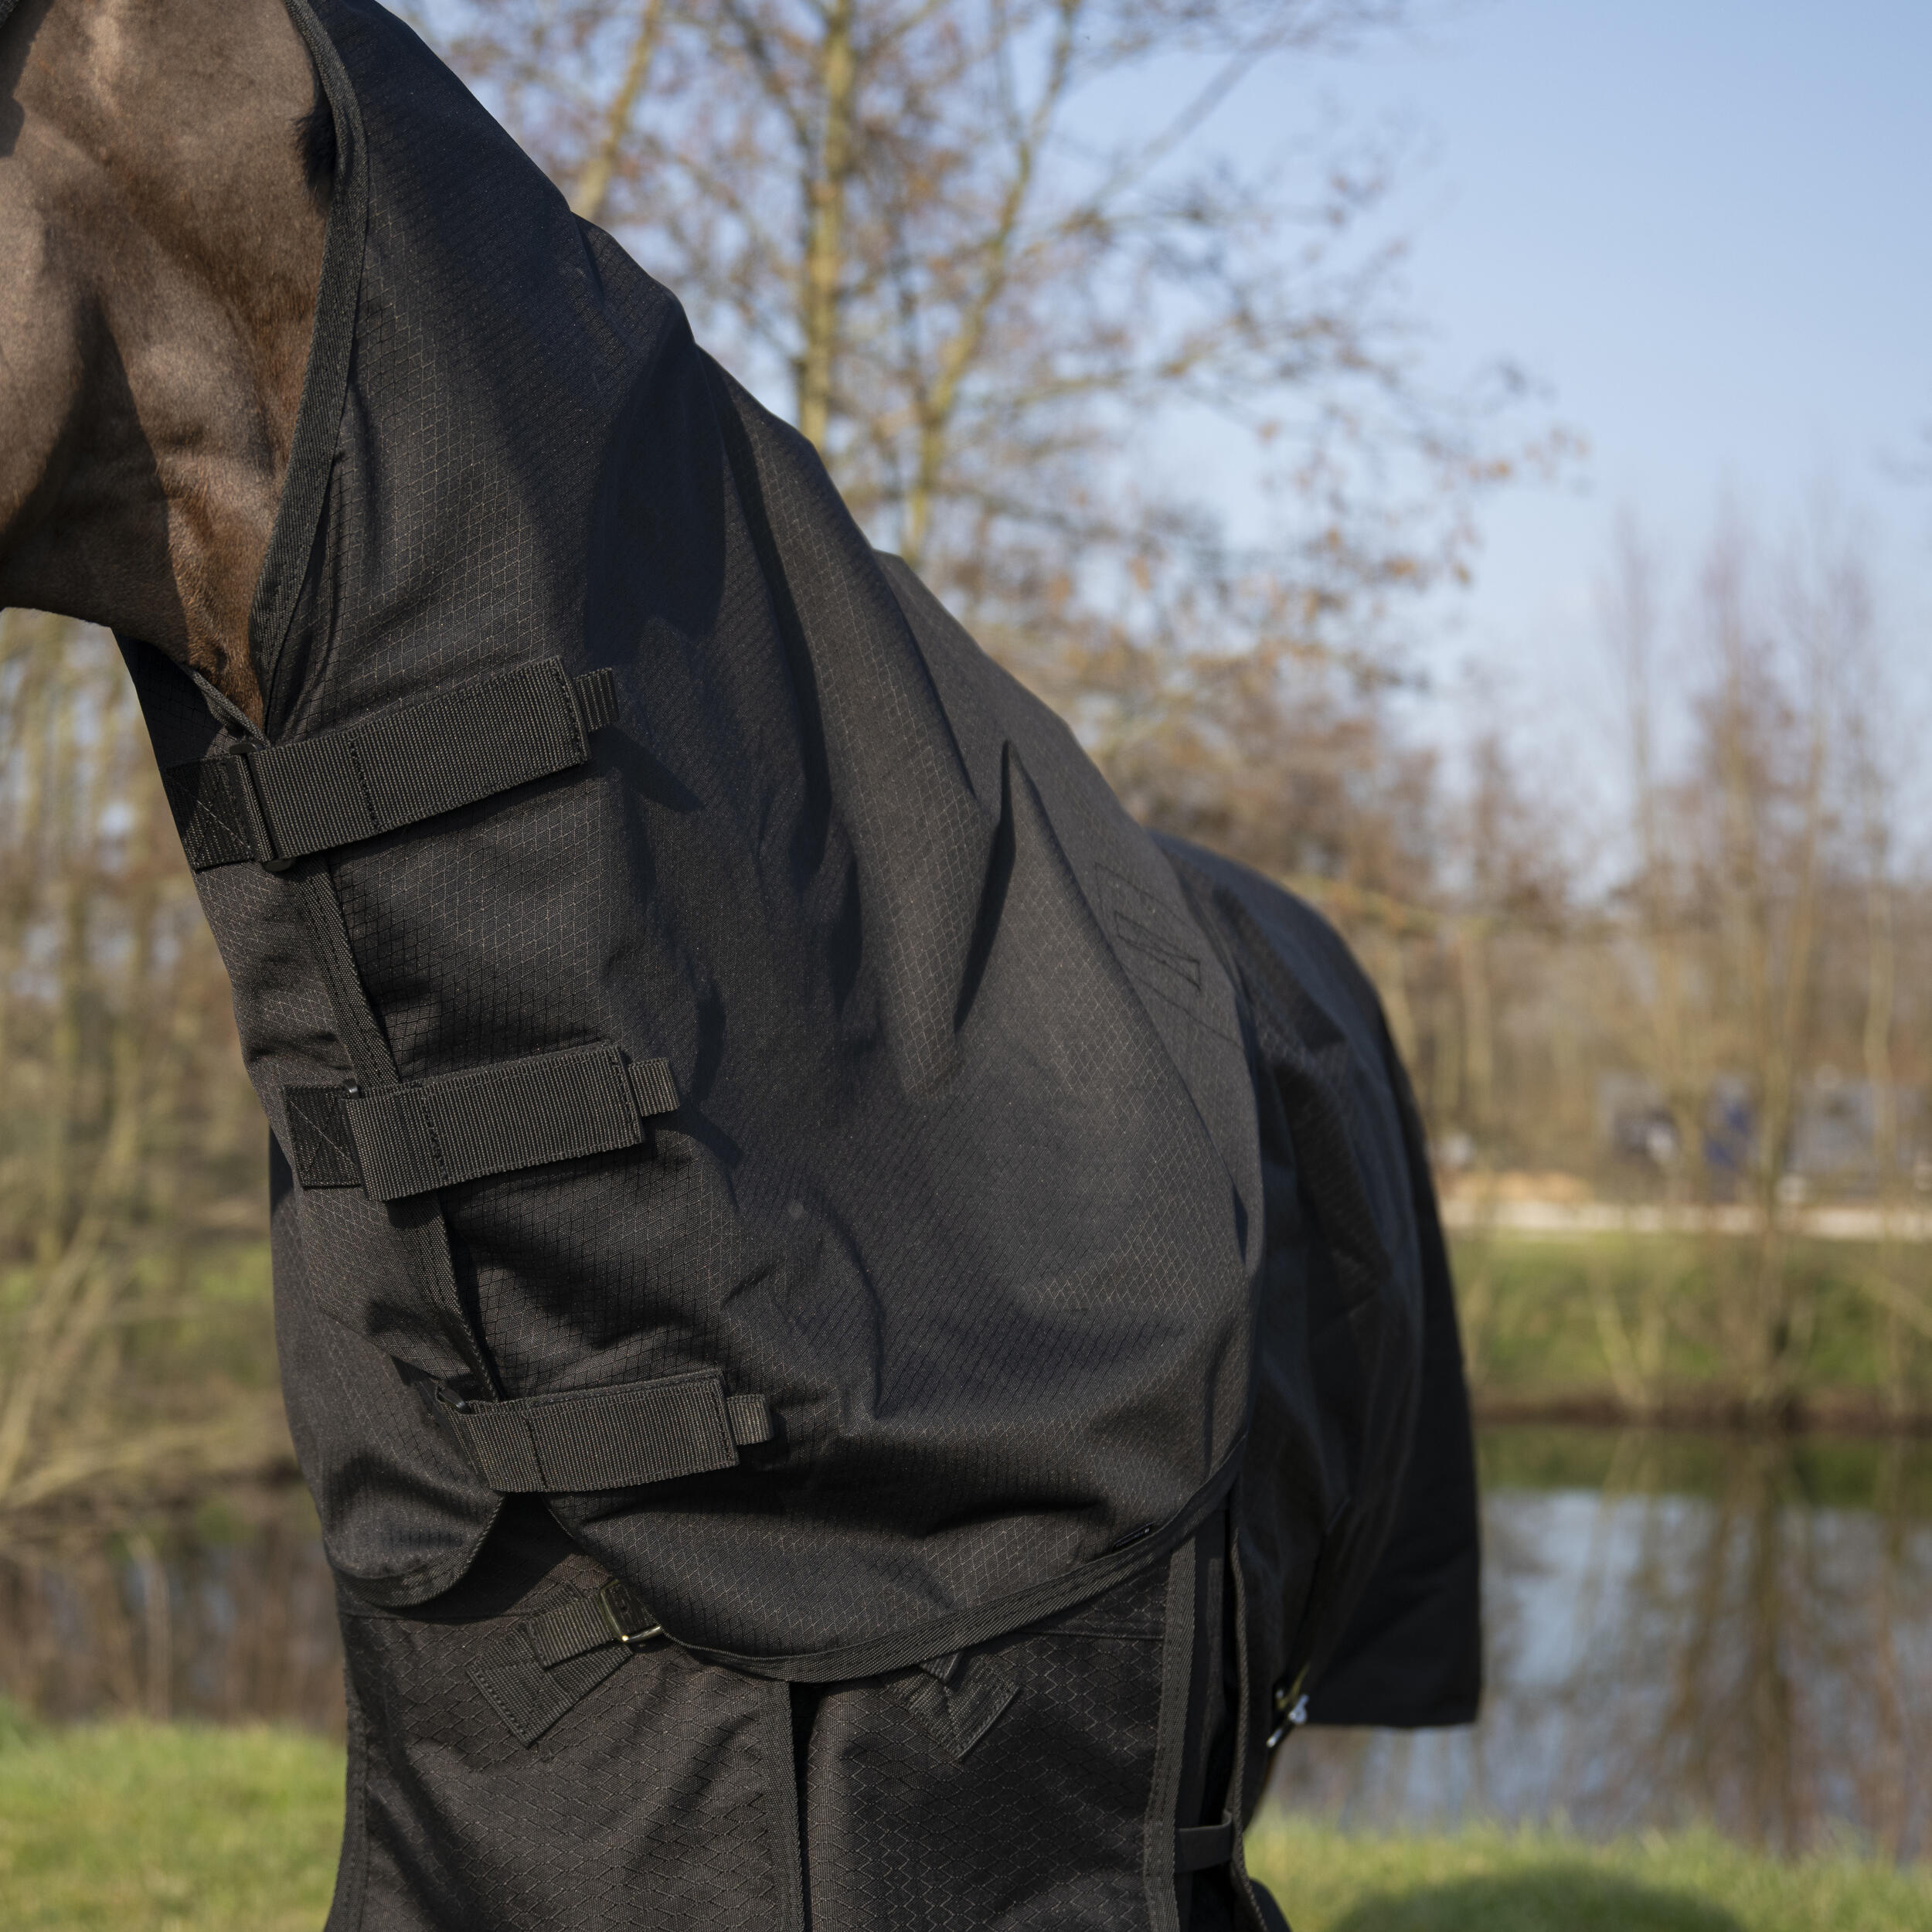 Horse Riding Waterproof Neck Cover Allweather Light - Black 4/7